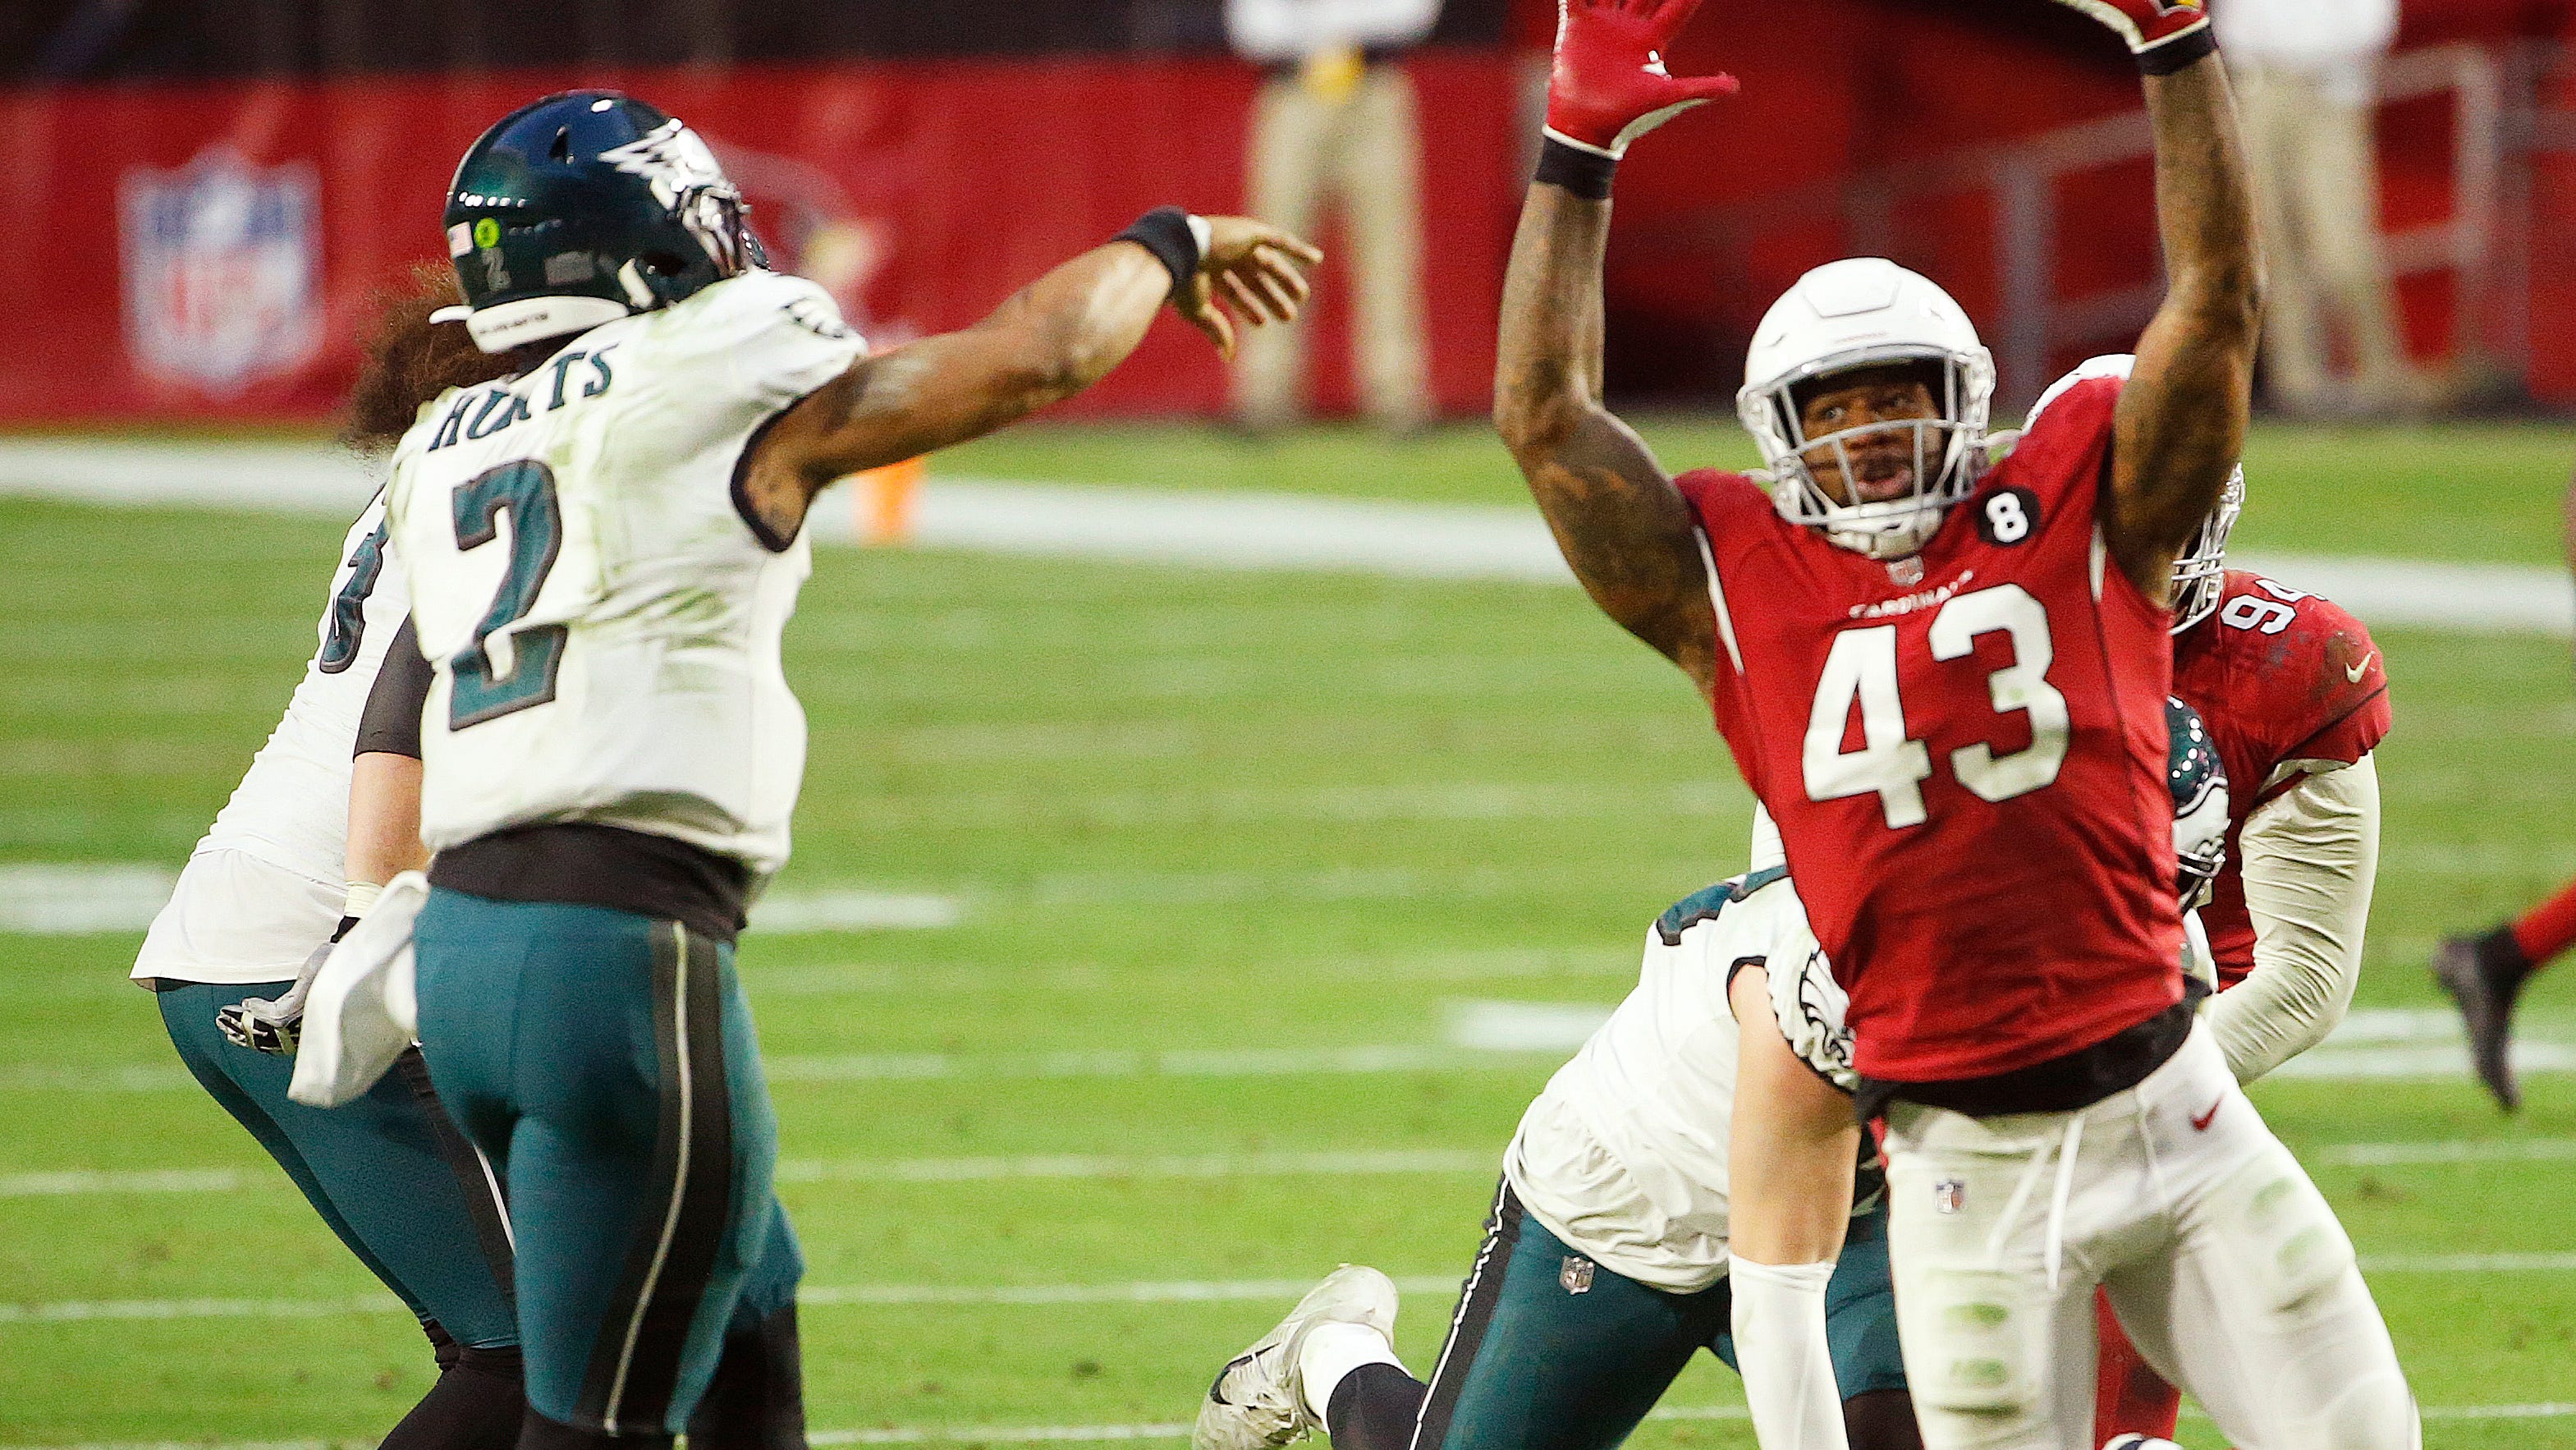 Cardinals' freeagent preview Examining the needs at ILB/OLB spots